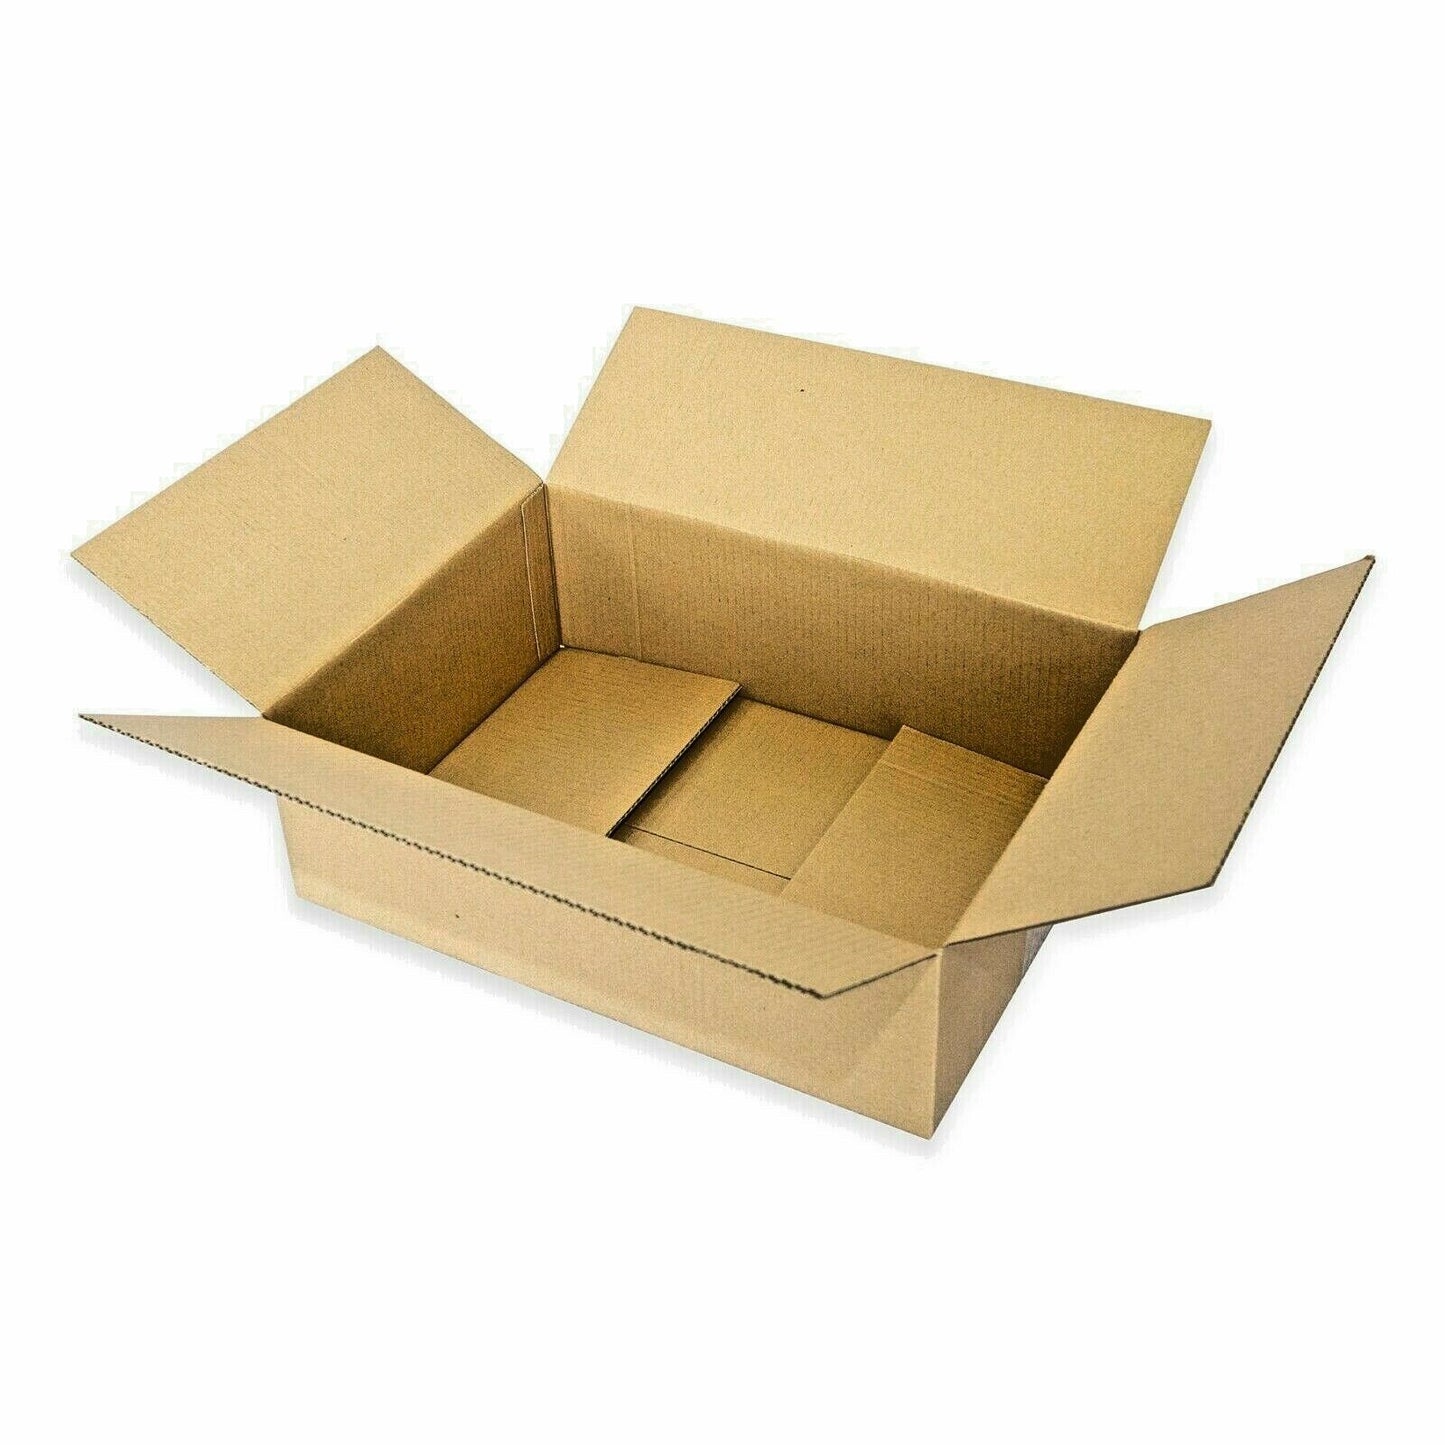 A3 Mailing Box 470 x 350 x 120mm Regular Shipping Carton 100% Recycled AU Made